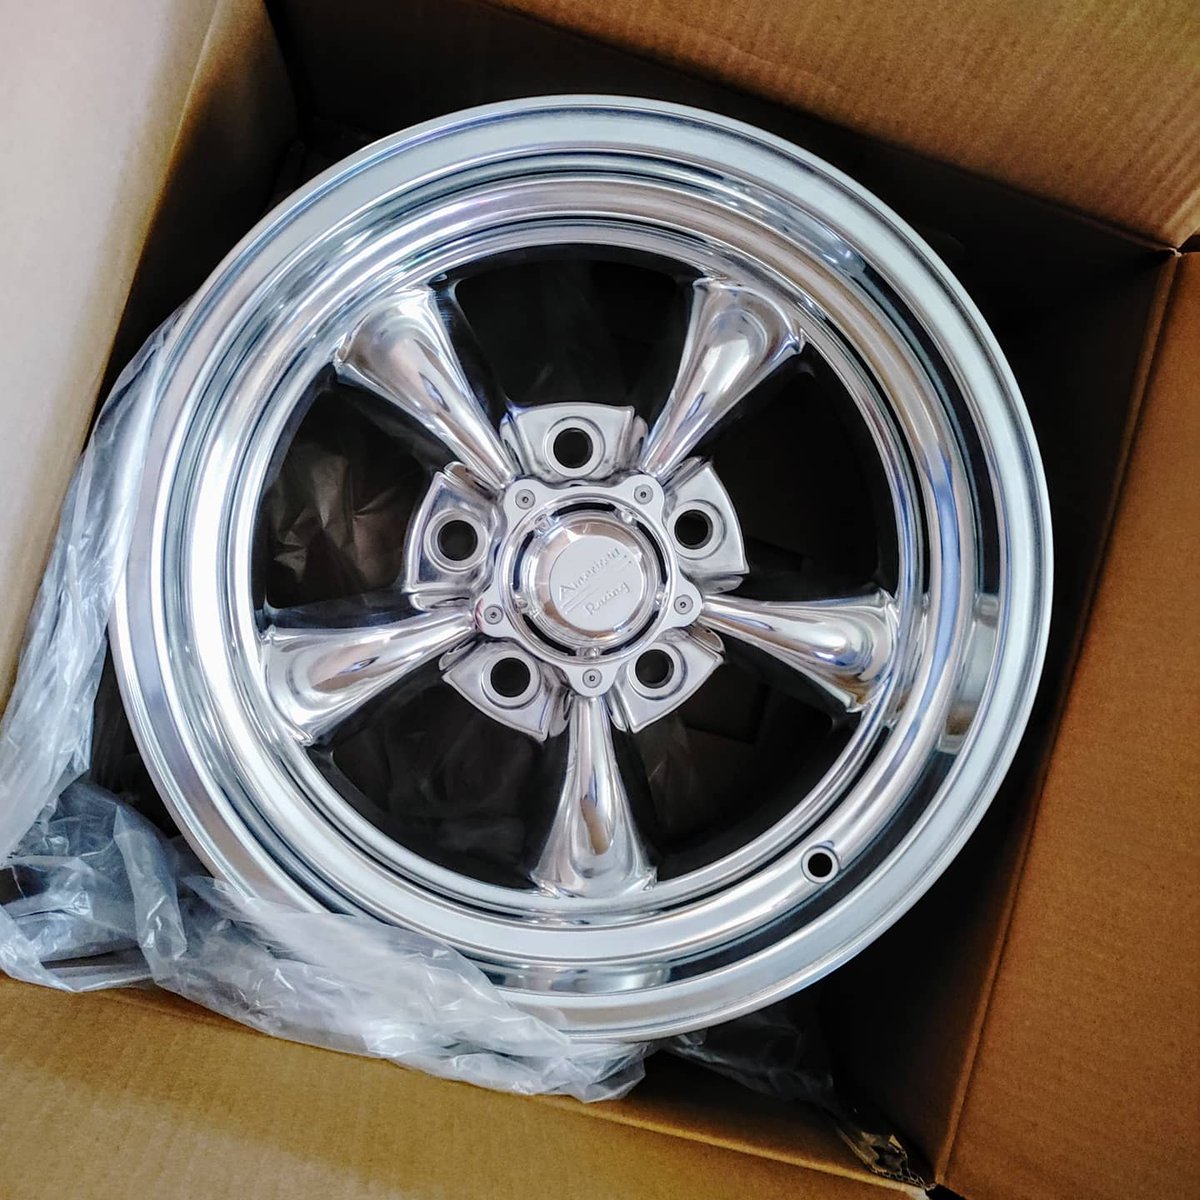 Guess what showed up today after a 3-4 week backorder! Huge shout-out and thanks to @wheelpros_usa and @americanracing for replacing my last 15' Torq Thrust II that was bent during shipping! #ClassicCar #Pontiac #Bonneville #Catalina #GrandPrix #Garage #PontiacsOfInstagram